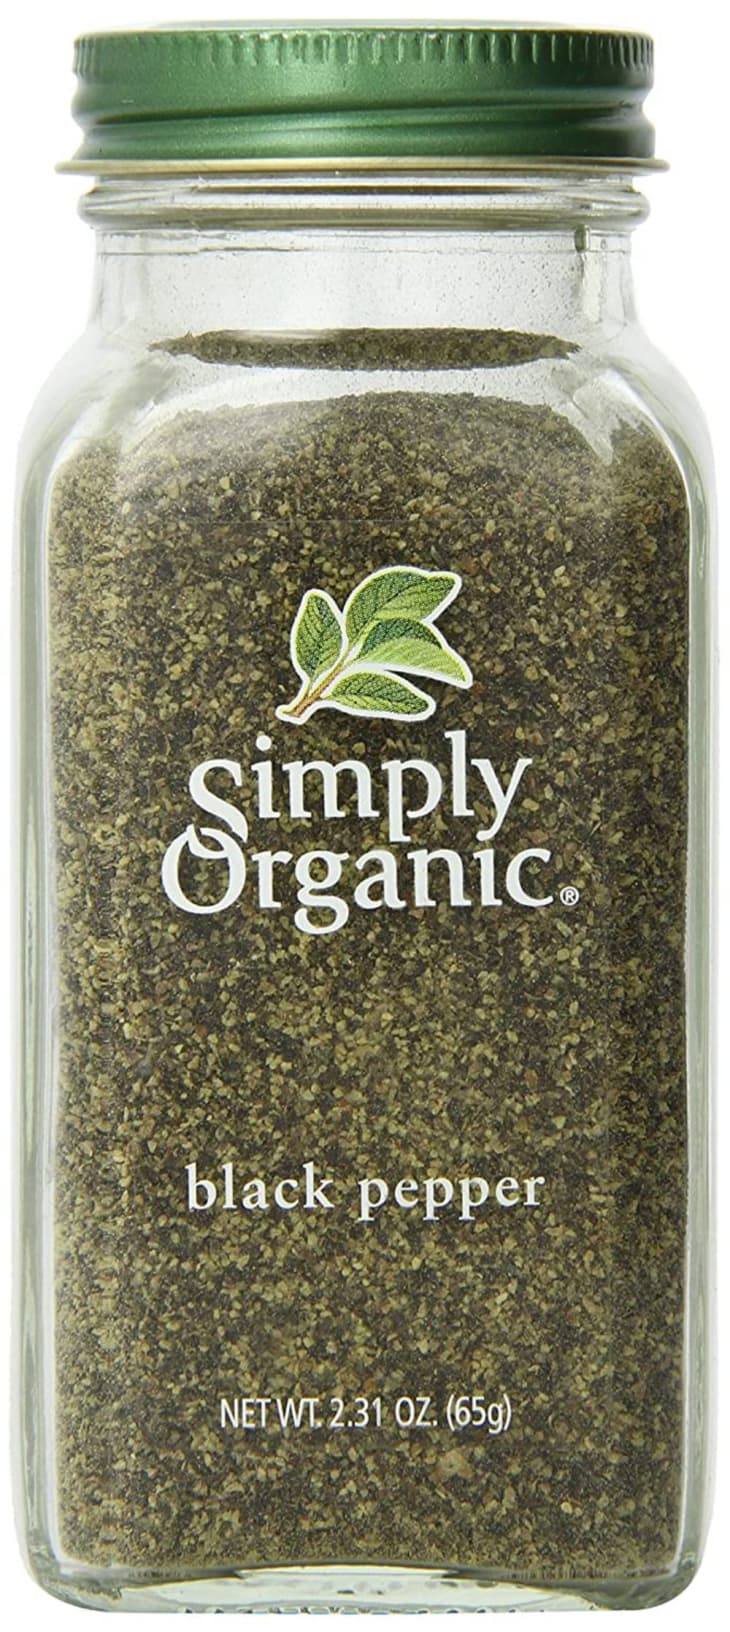 Product Image: Simply Organic Black Pepper